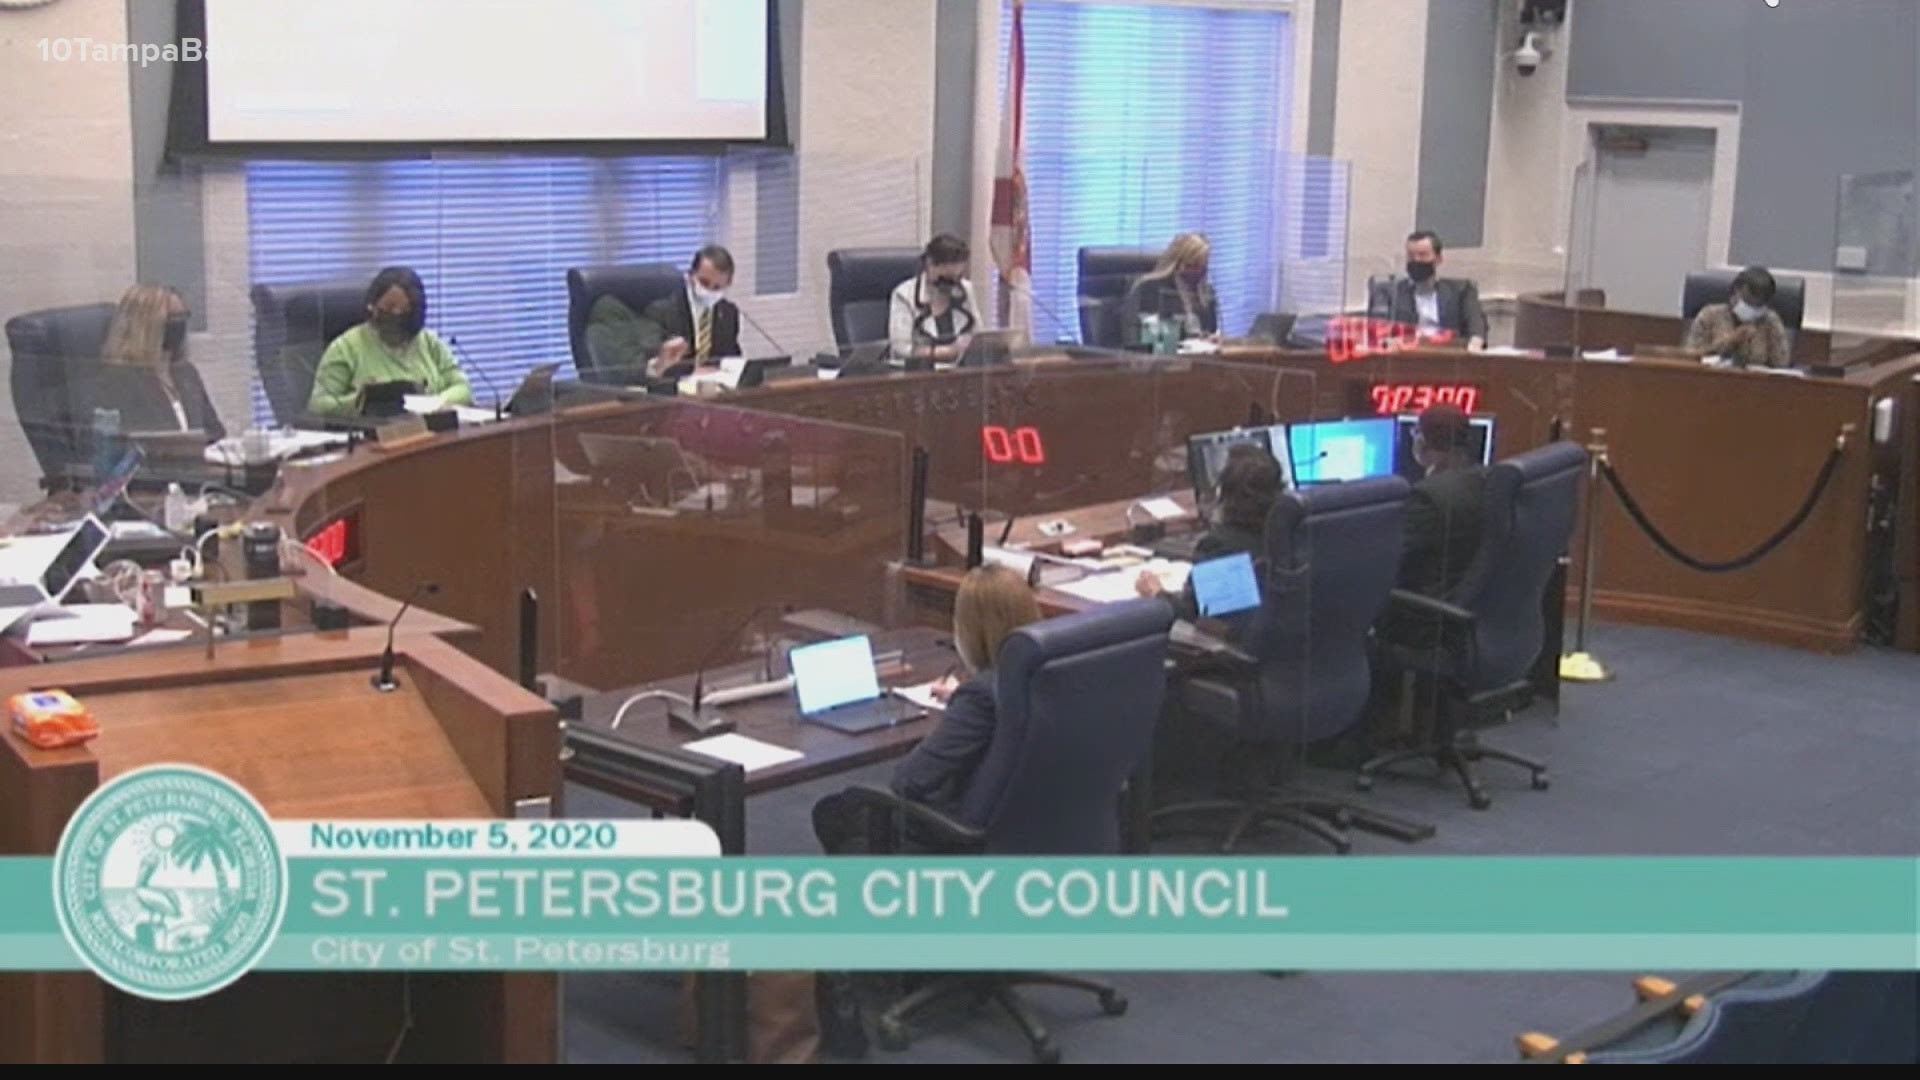 St. Petersburg City Council met in person for the first time in months Thursday.